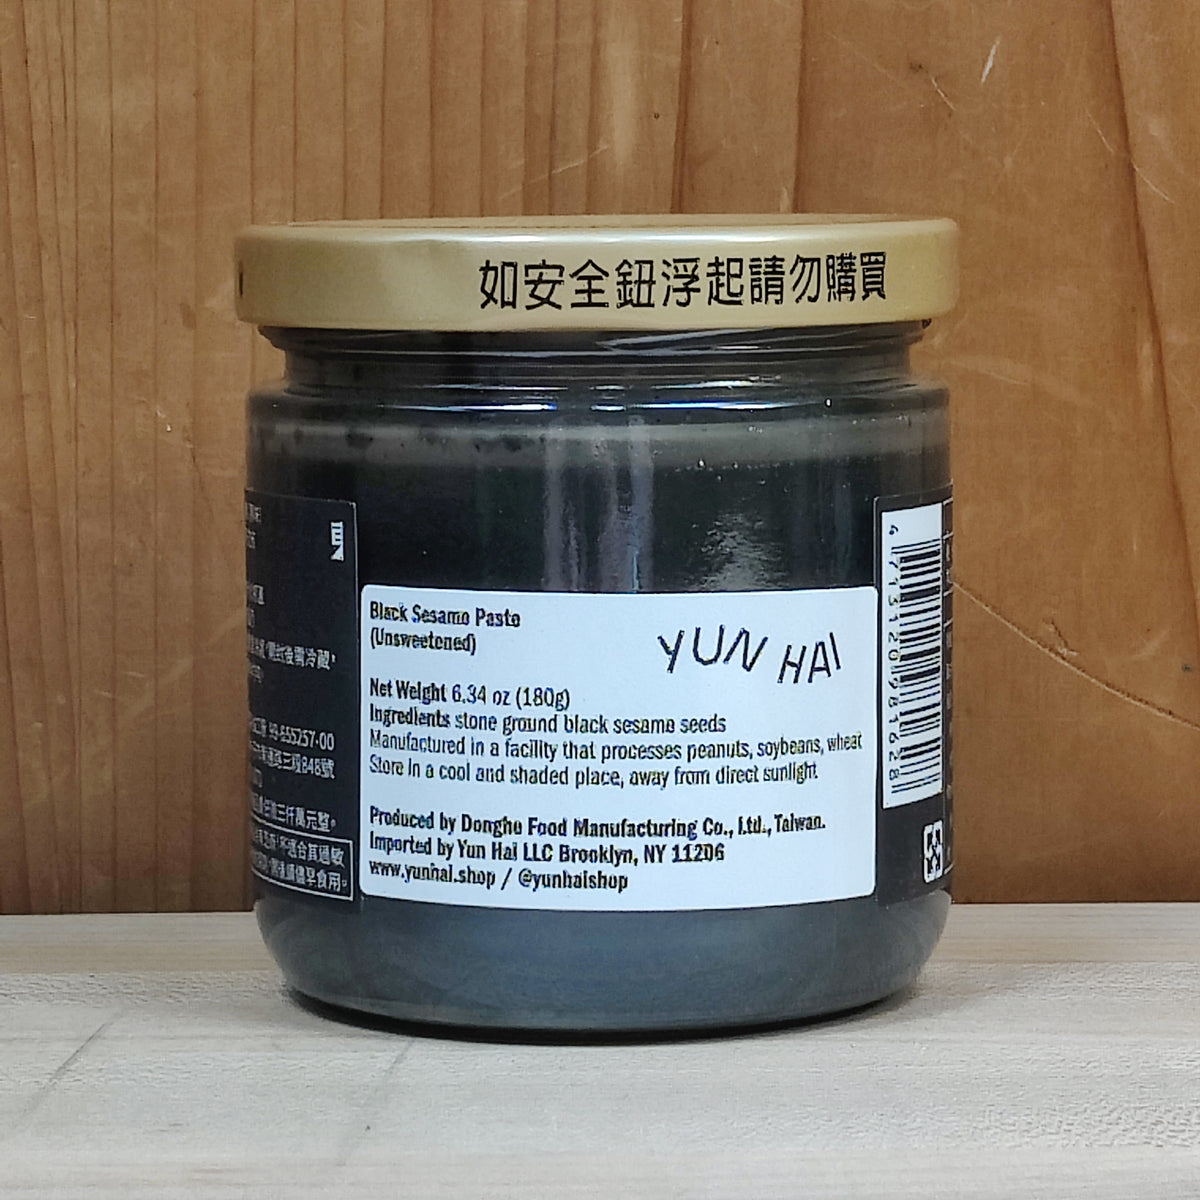 Dong He Unsweetened Black Sesame Paste - 180g